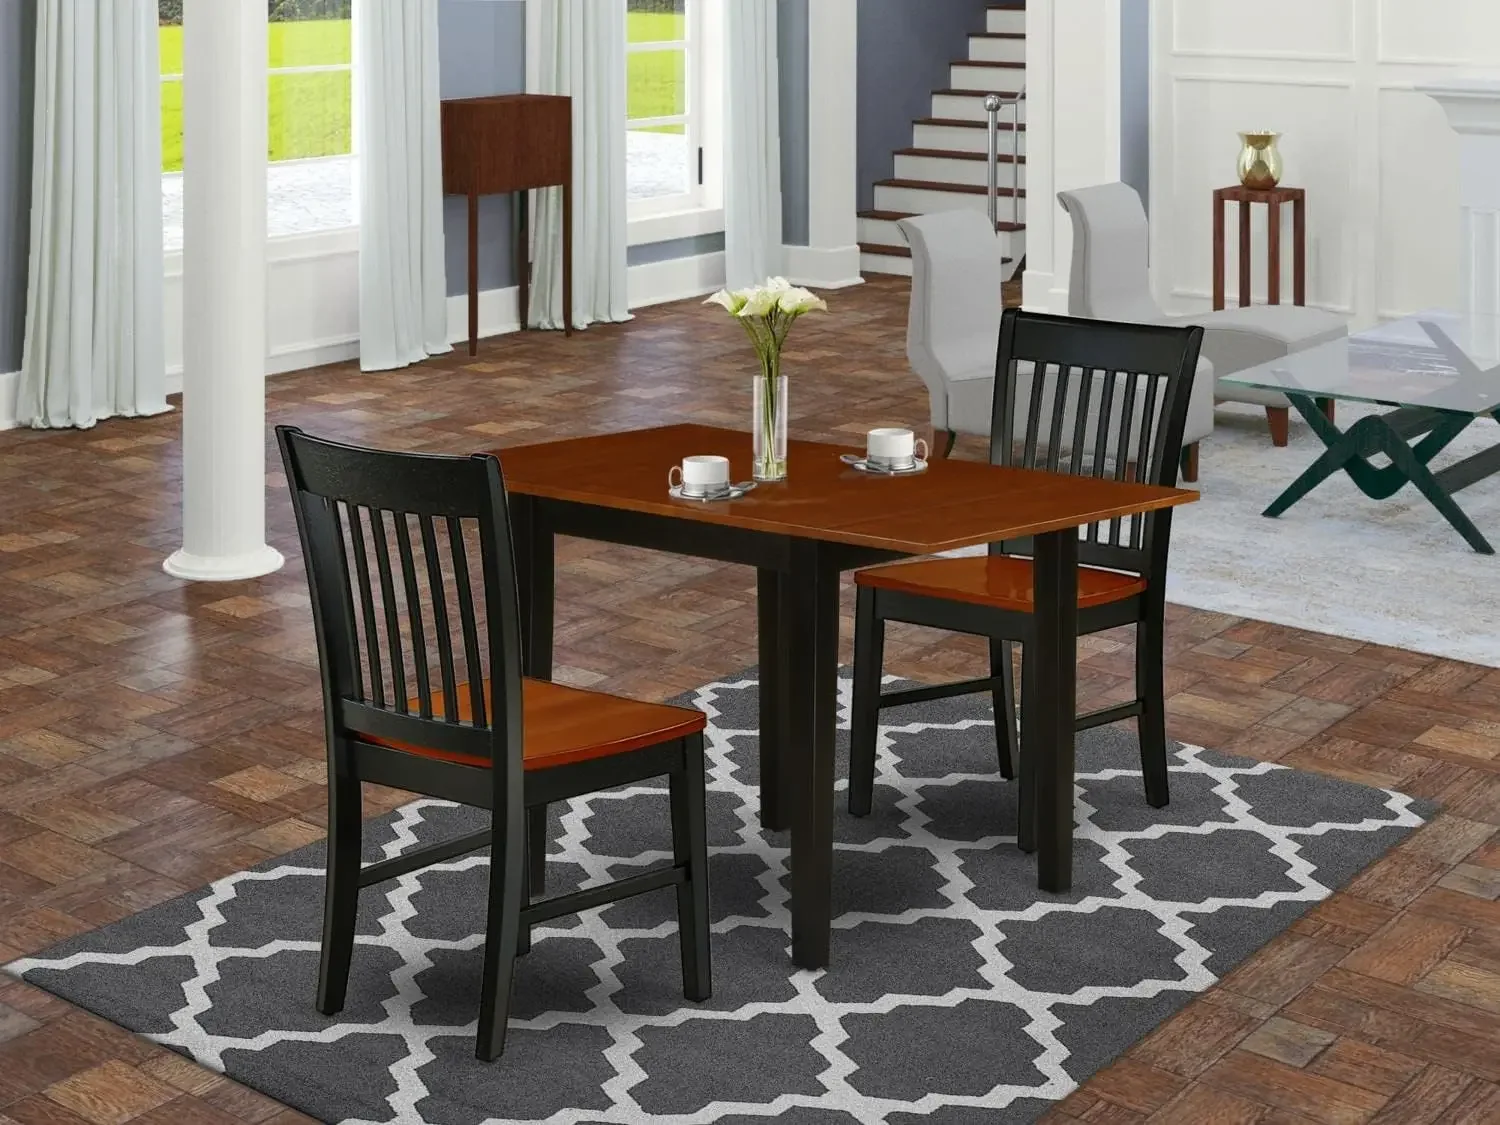 

3 Piece Dinette Set for Small Spaces Contains a Rectangle Table with Dropleaf and 2 Dining Room Chairs,30x48 Inch